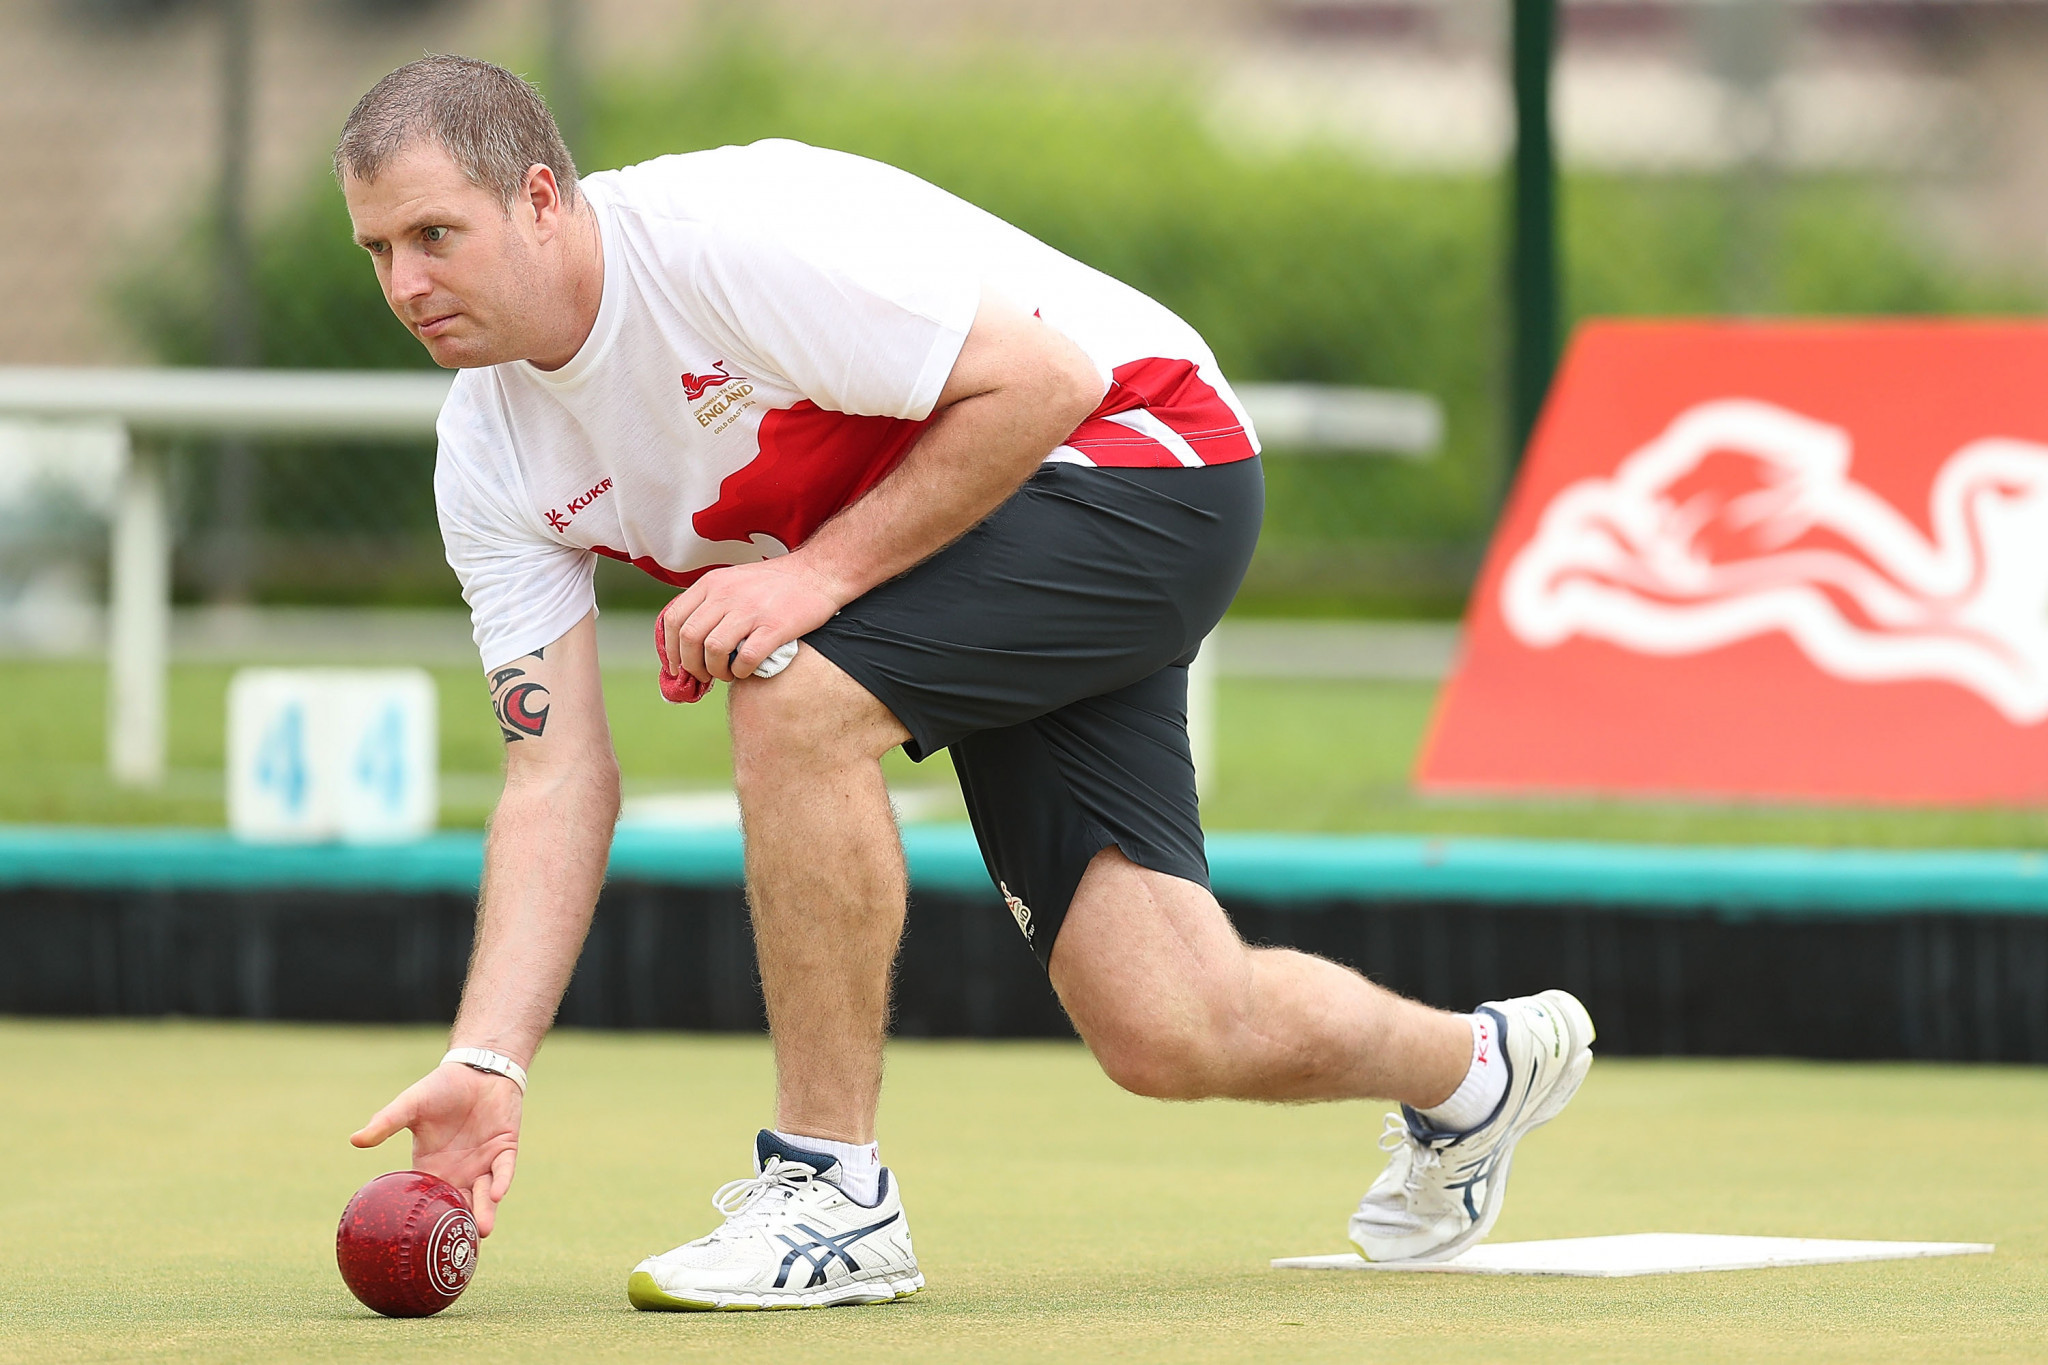 Robert Paxton has been named on the England team for the 2020 World Bowls Championships ©Getty Images